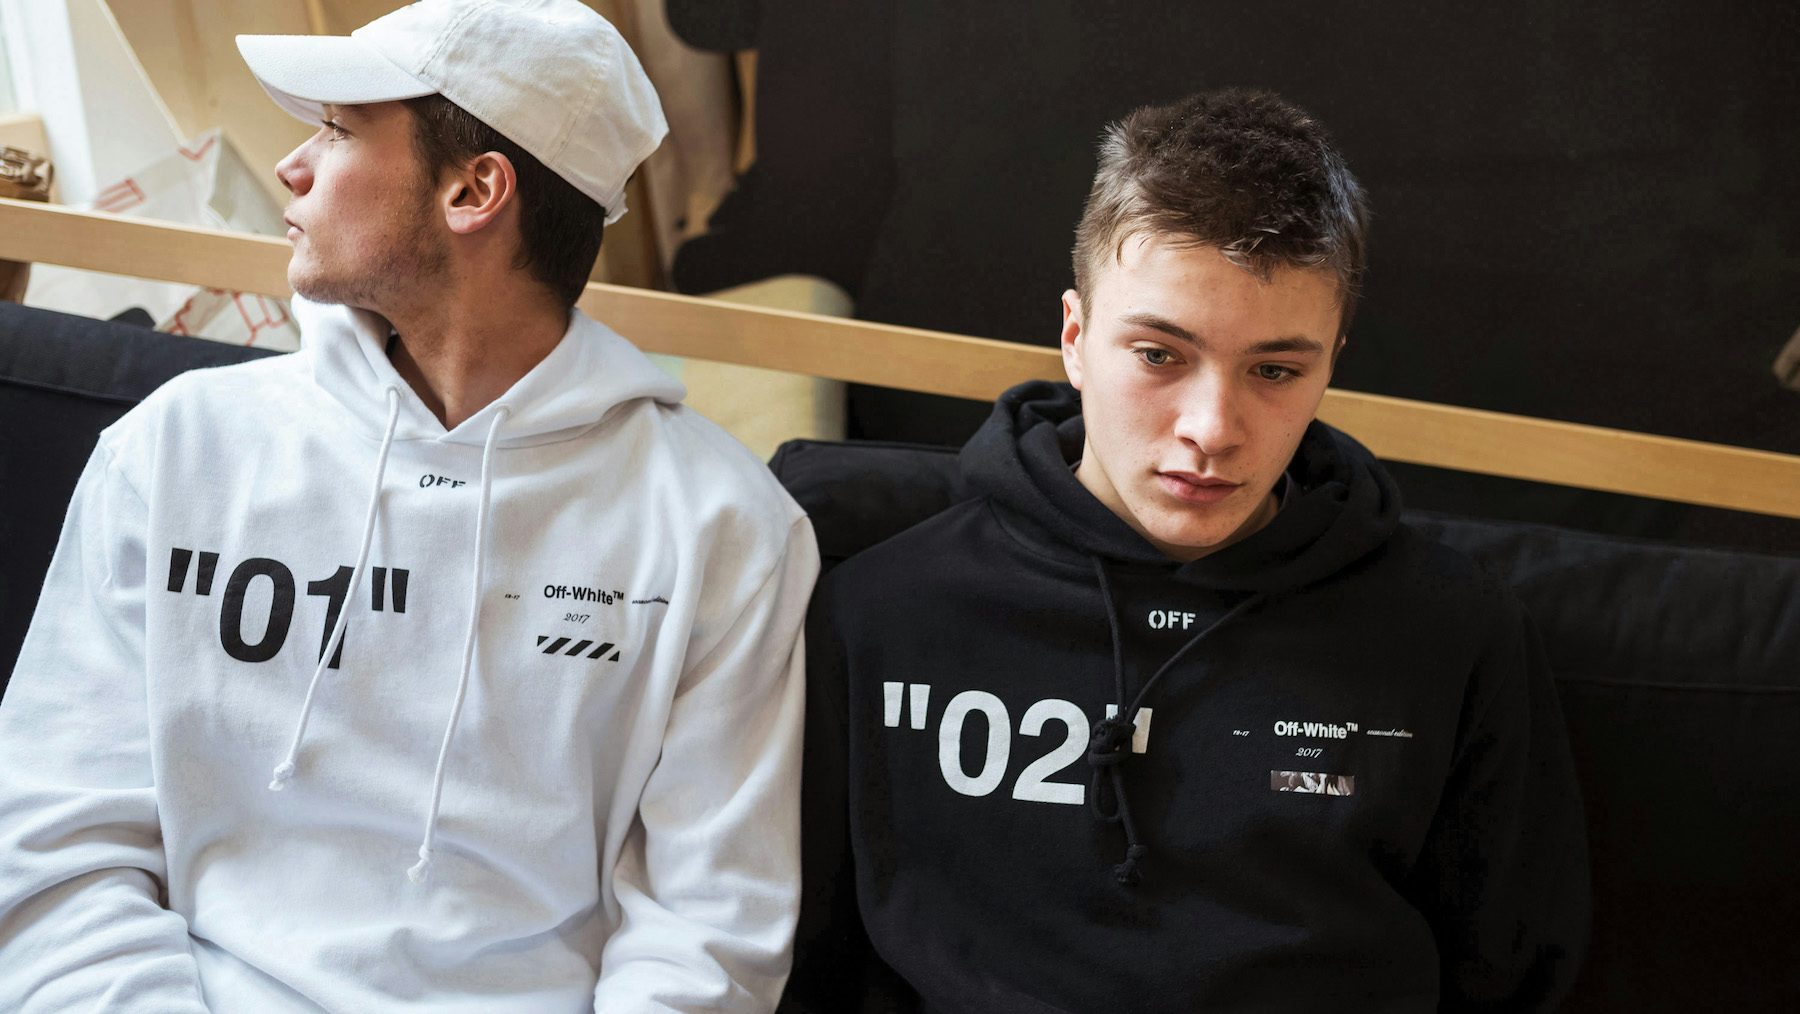 Off-White Launches a 'More Affordable 